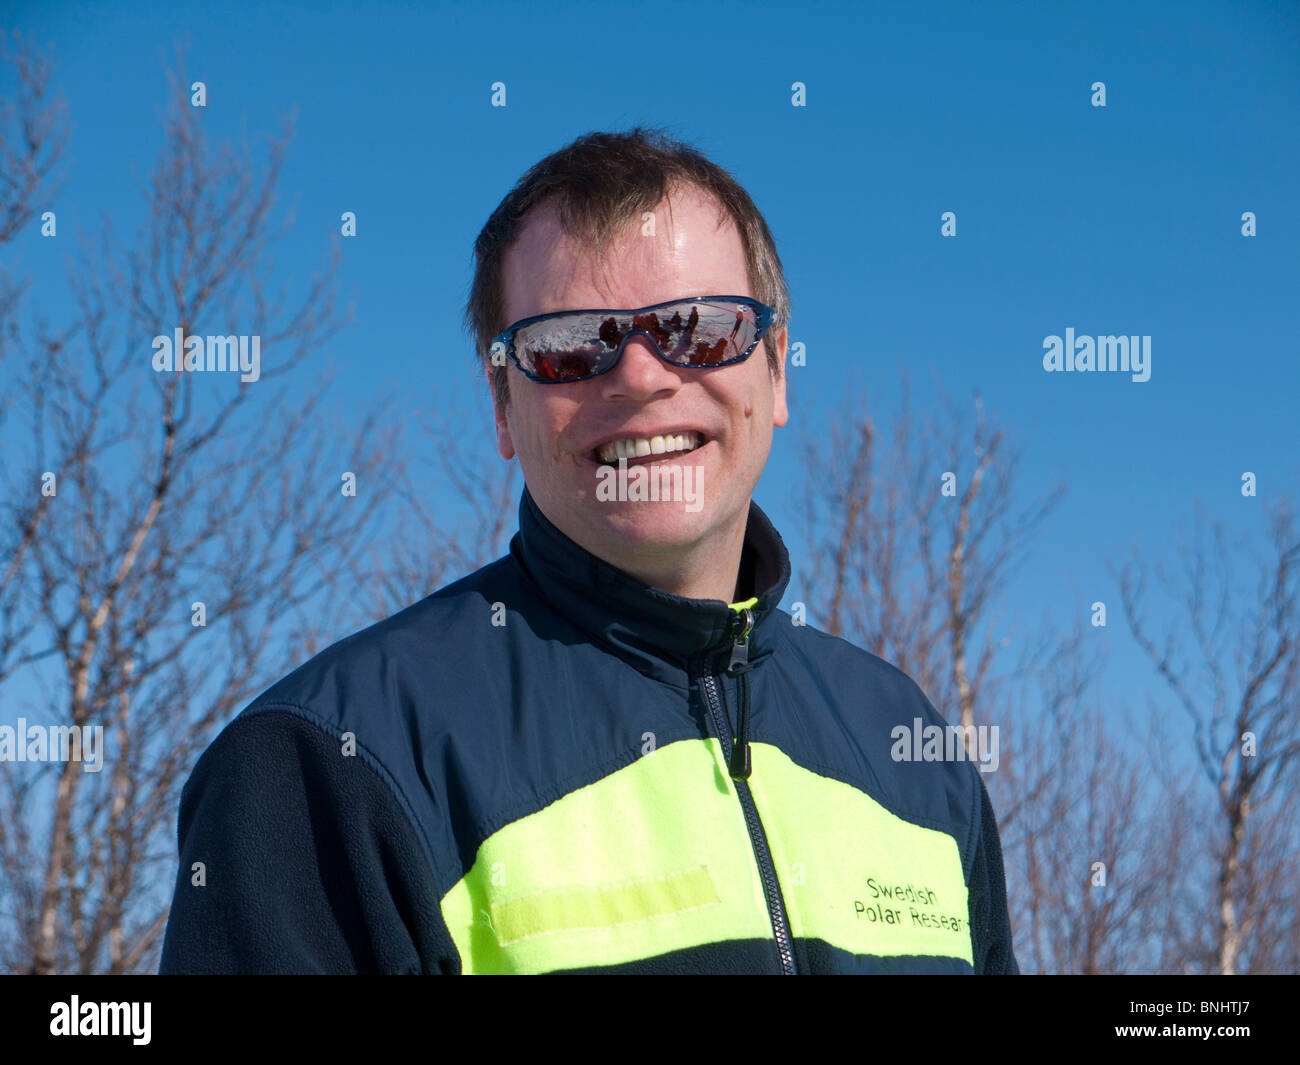 A Swedish polar researcher in his forties with sunglasses in a good mood. Stock Photo